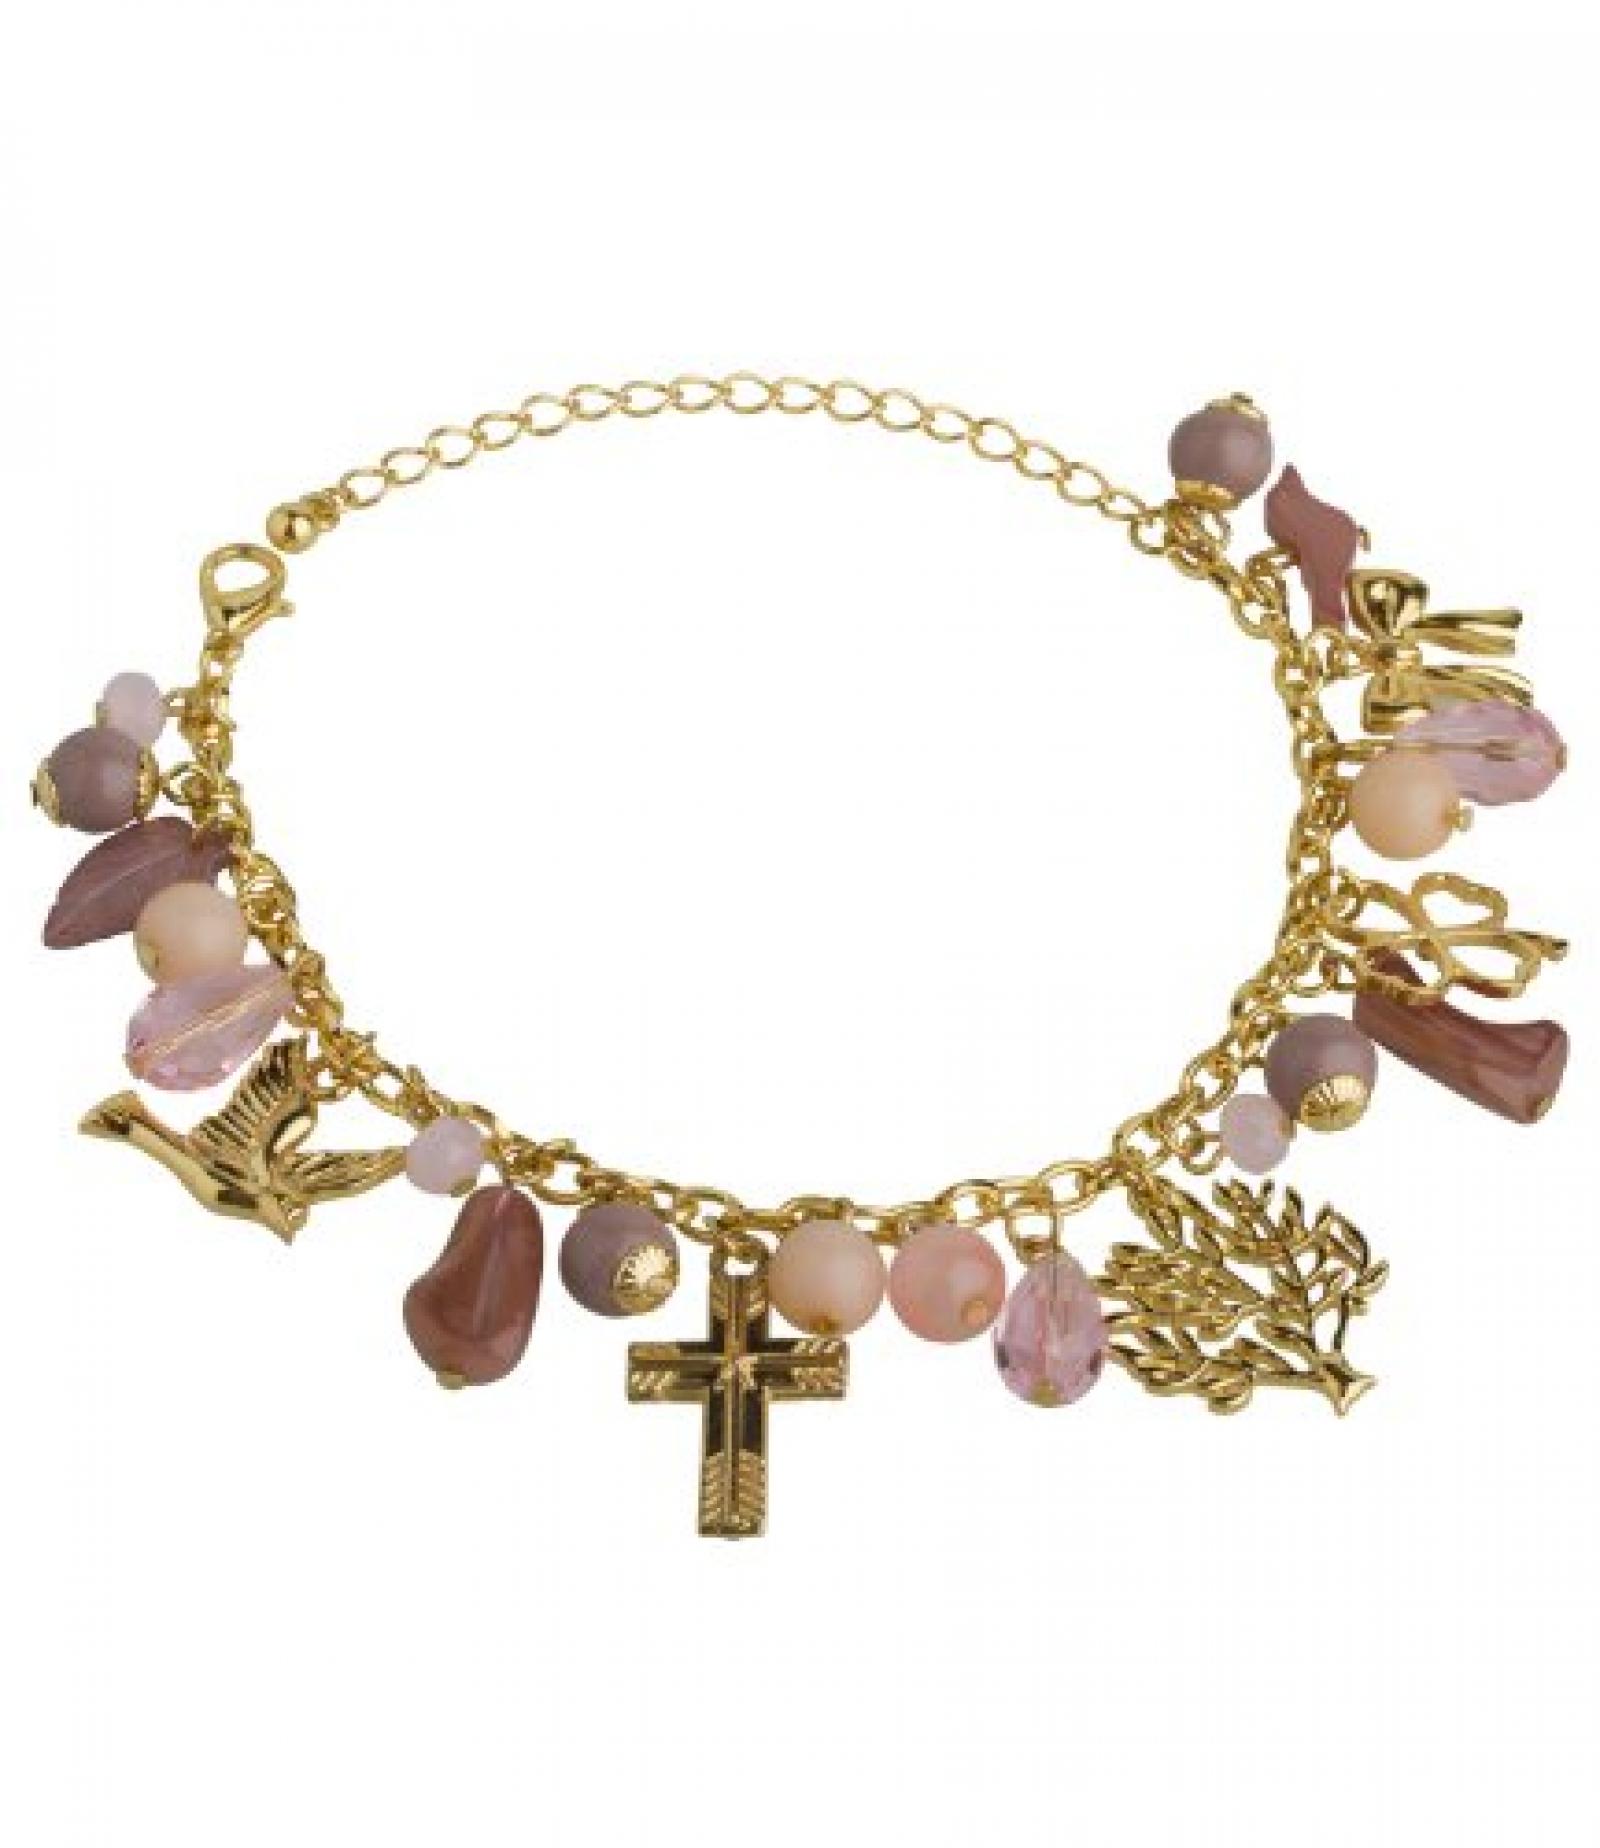 SIX "Touch of Nude" goldenes Bettel Armband mit rosa-lila Anhängern (358-437) 